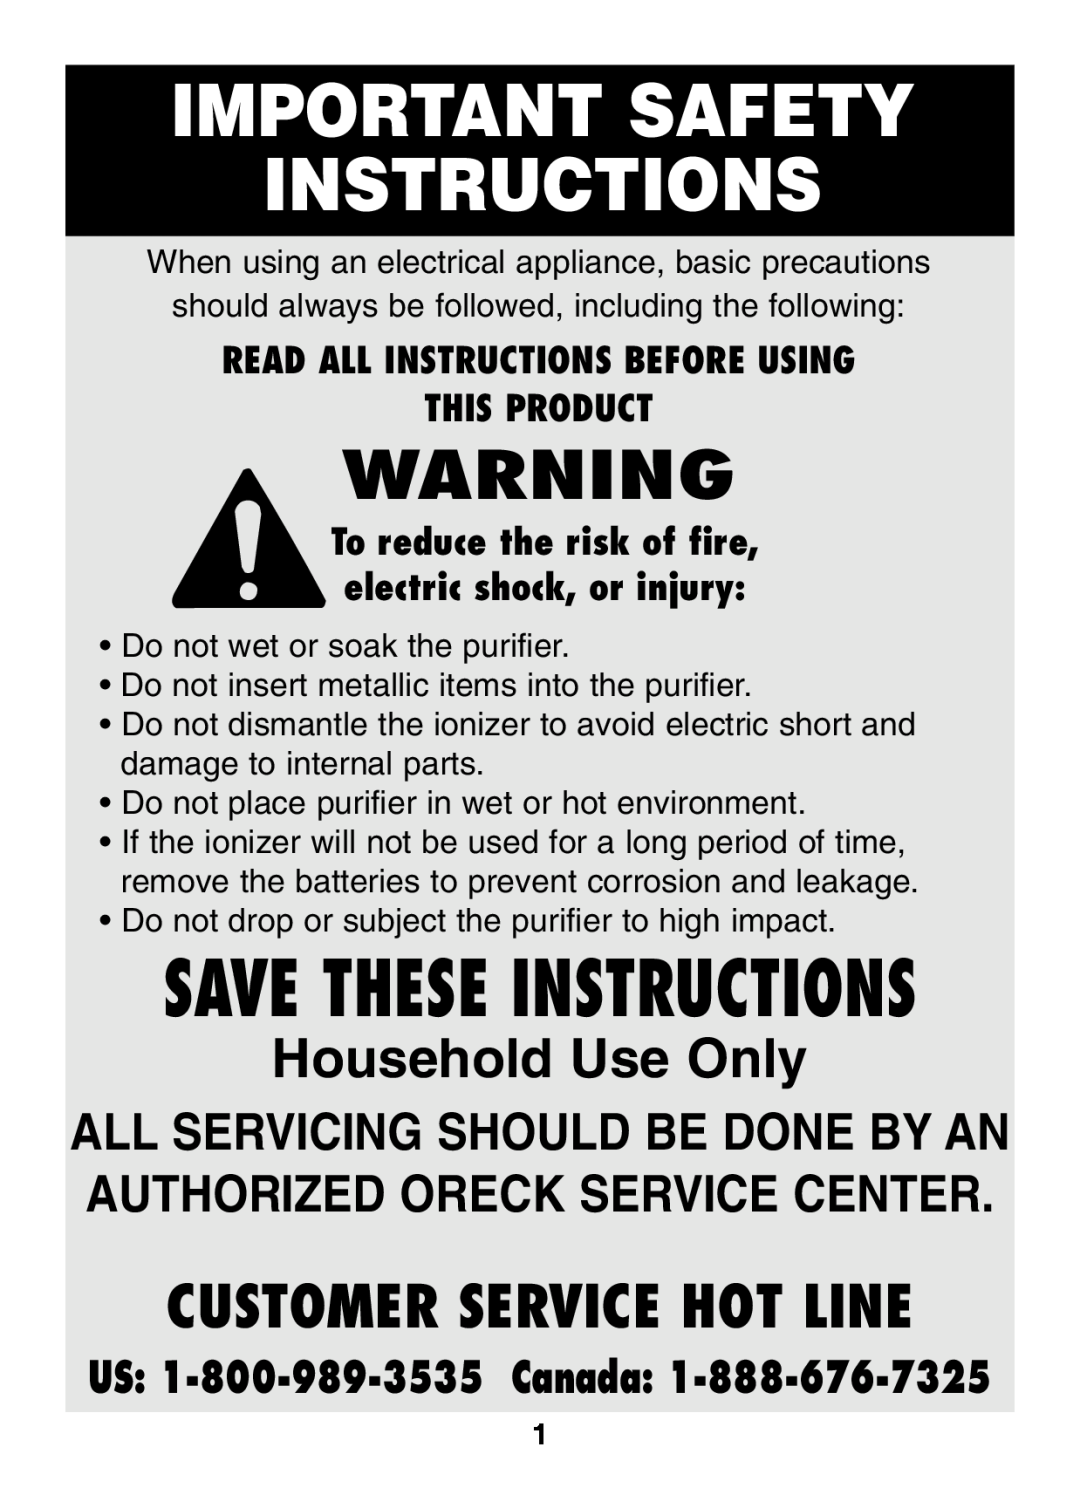 Oreck XJ-100 Customer Service Hot Line, Read All Instructions Before Using This Product, Important Safety Instructions 